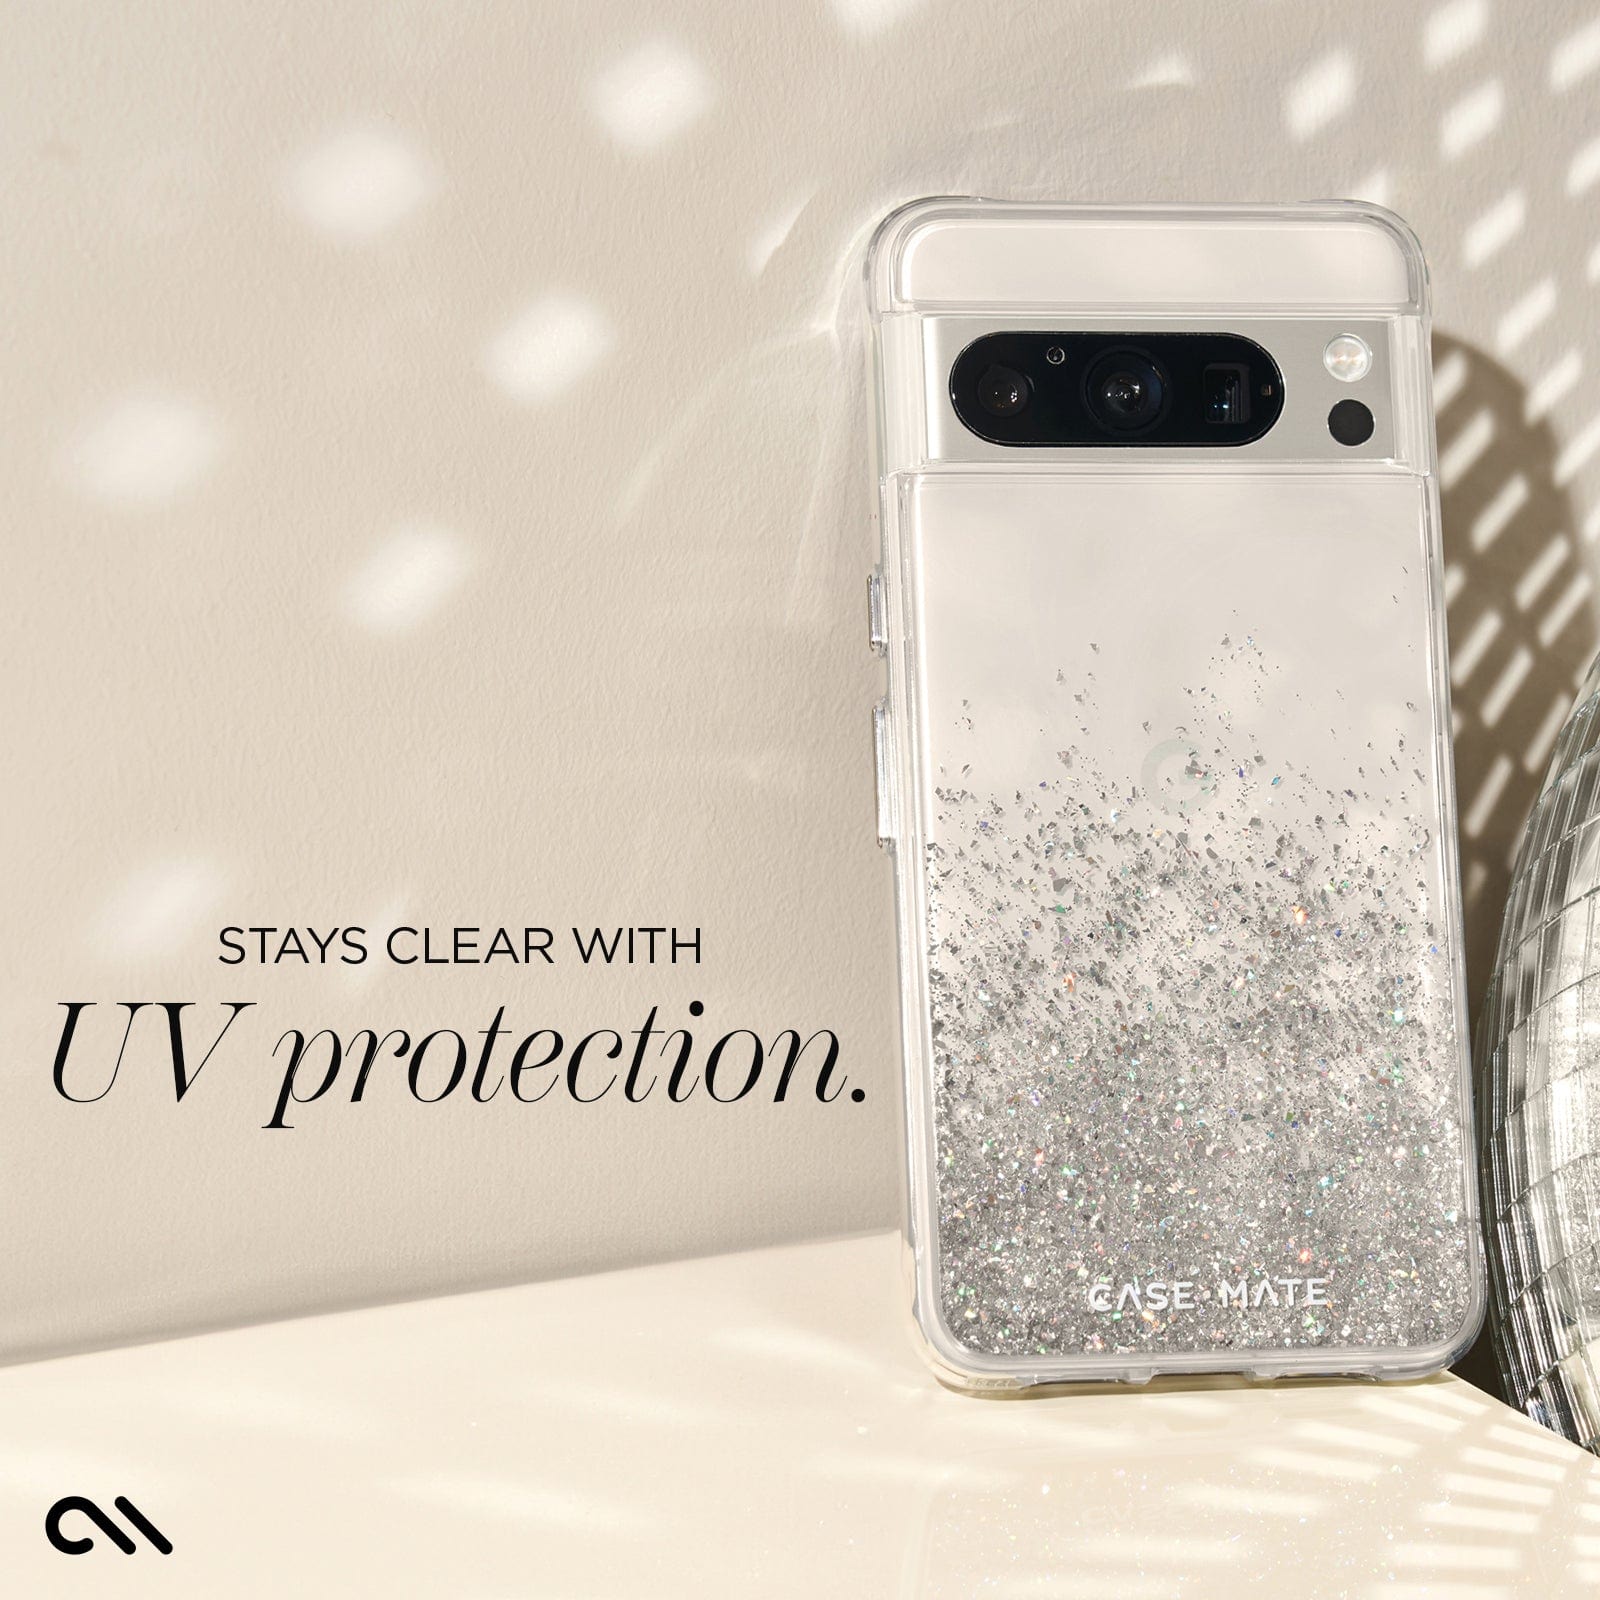 STAYS CLEAR WITH UV PROTECTION